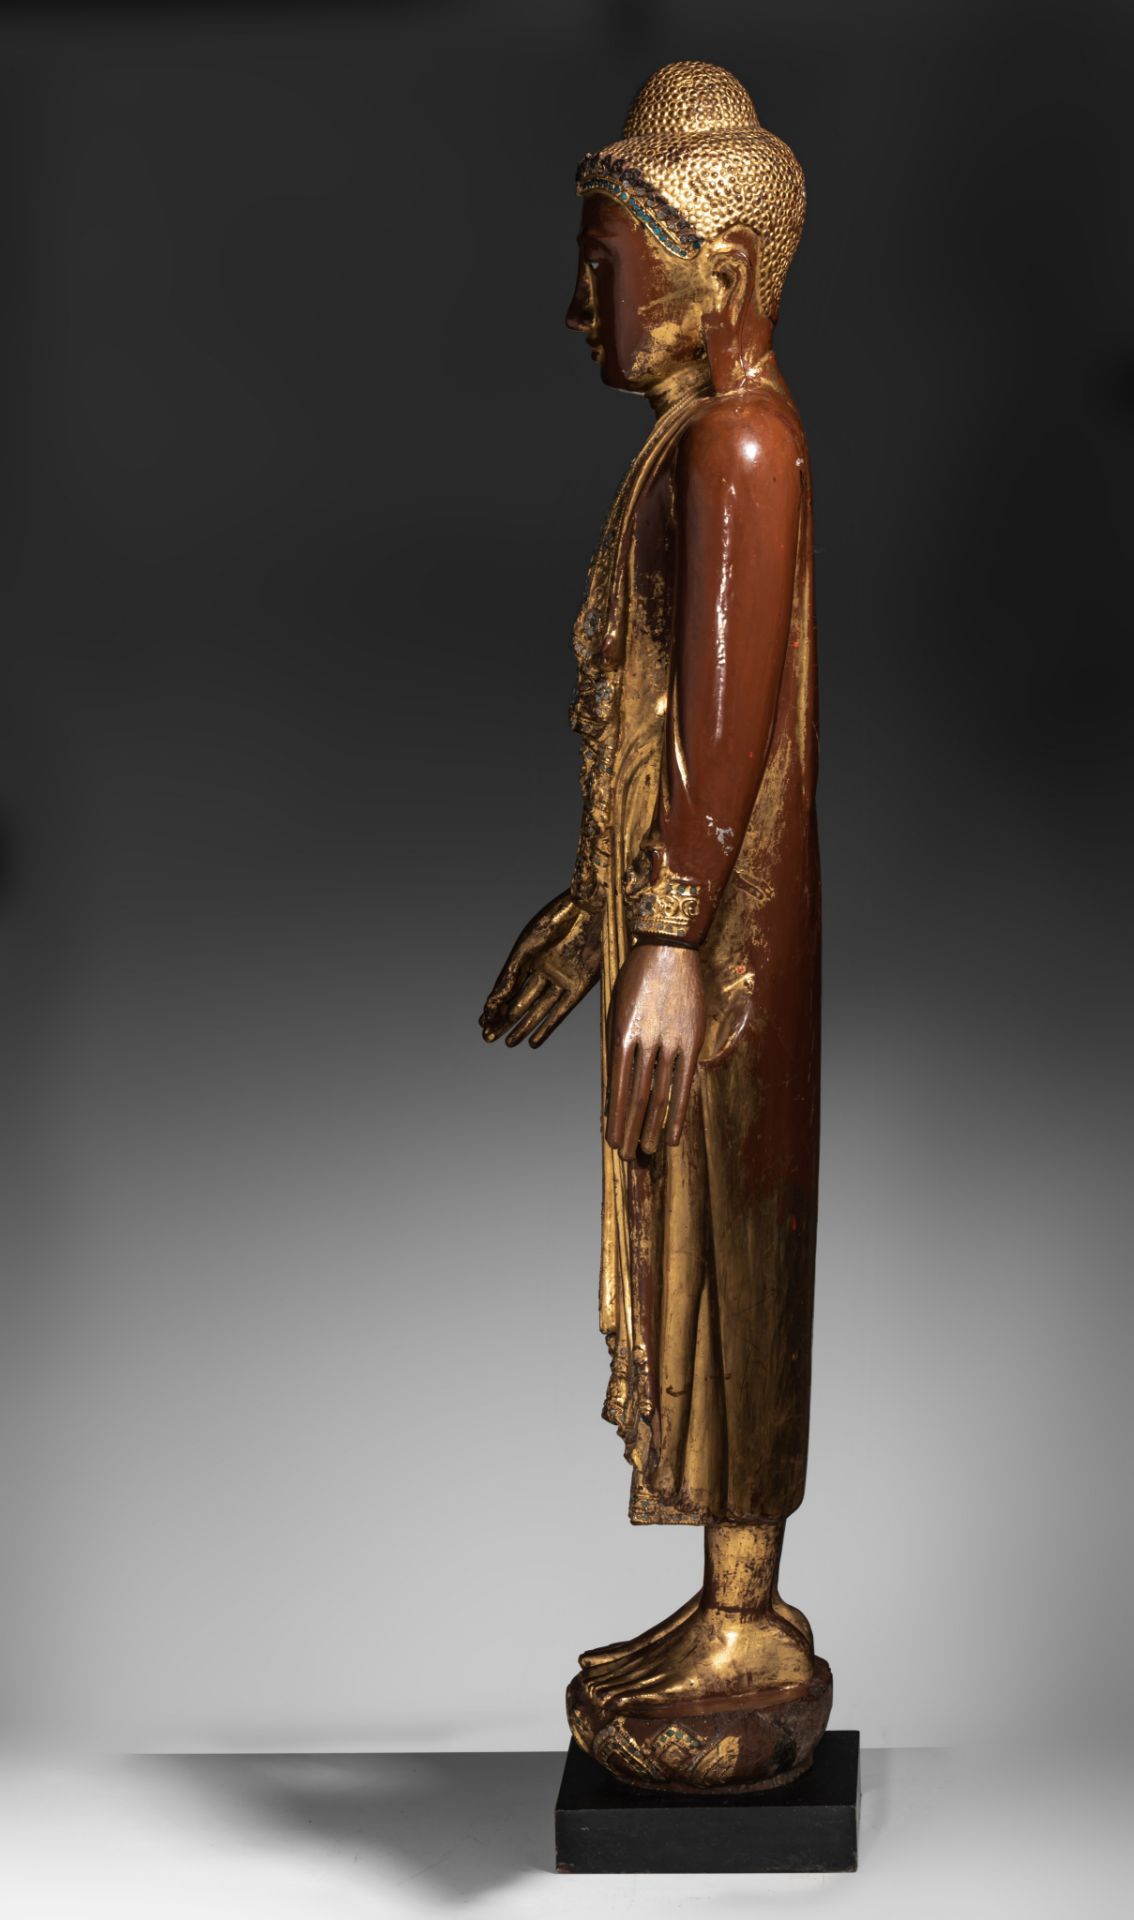 A Burmese gilt lacquered wooden figure of standing Buddha, inlaid with glass beads, 19thC, H 103,5 c - Image 3 of 5